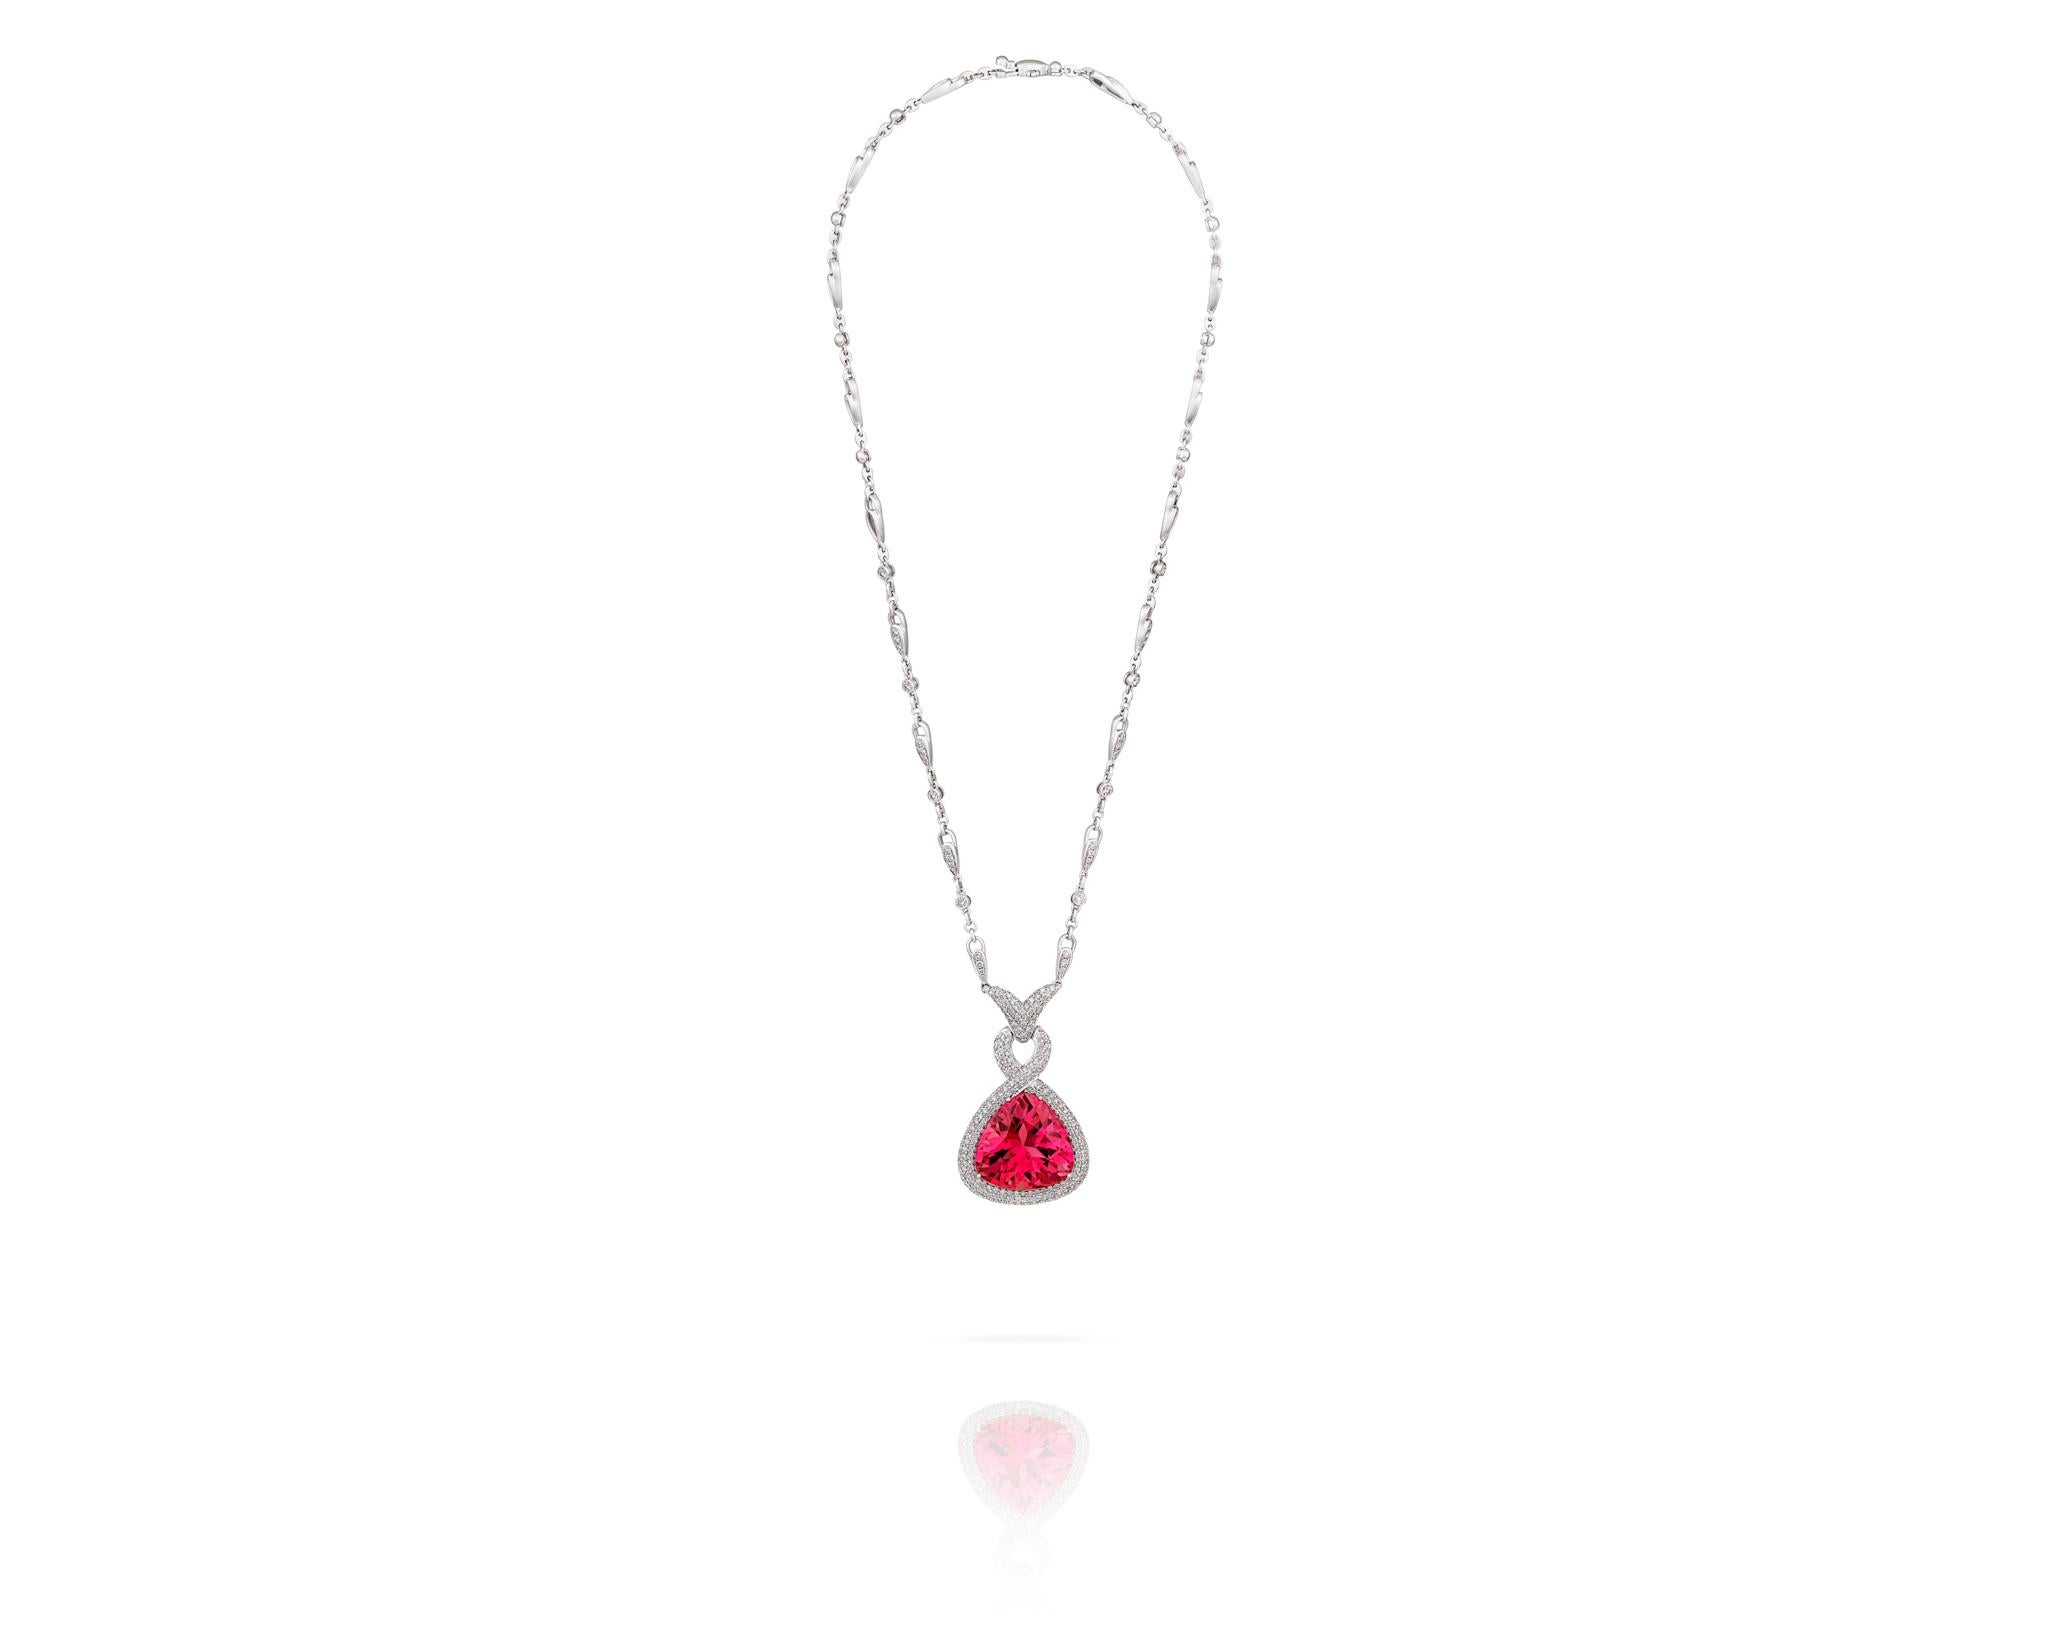 A Beautiful 31.24ct Pink Tourmaline Pear-Shaped Stone surrounded by 4.38ct of Diamonds on an 18kt White Gold Chain. With the highest quality materials and intricate design, this piece will make you feel like you're a royal in the Renaissance Age.